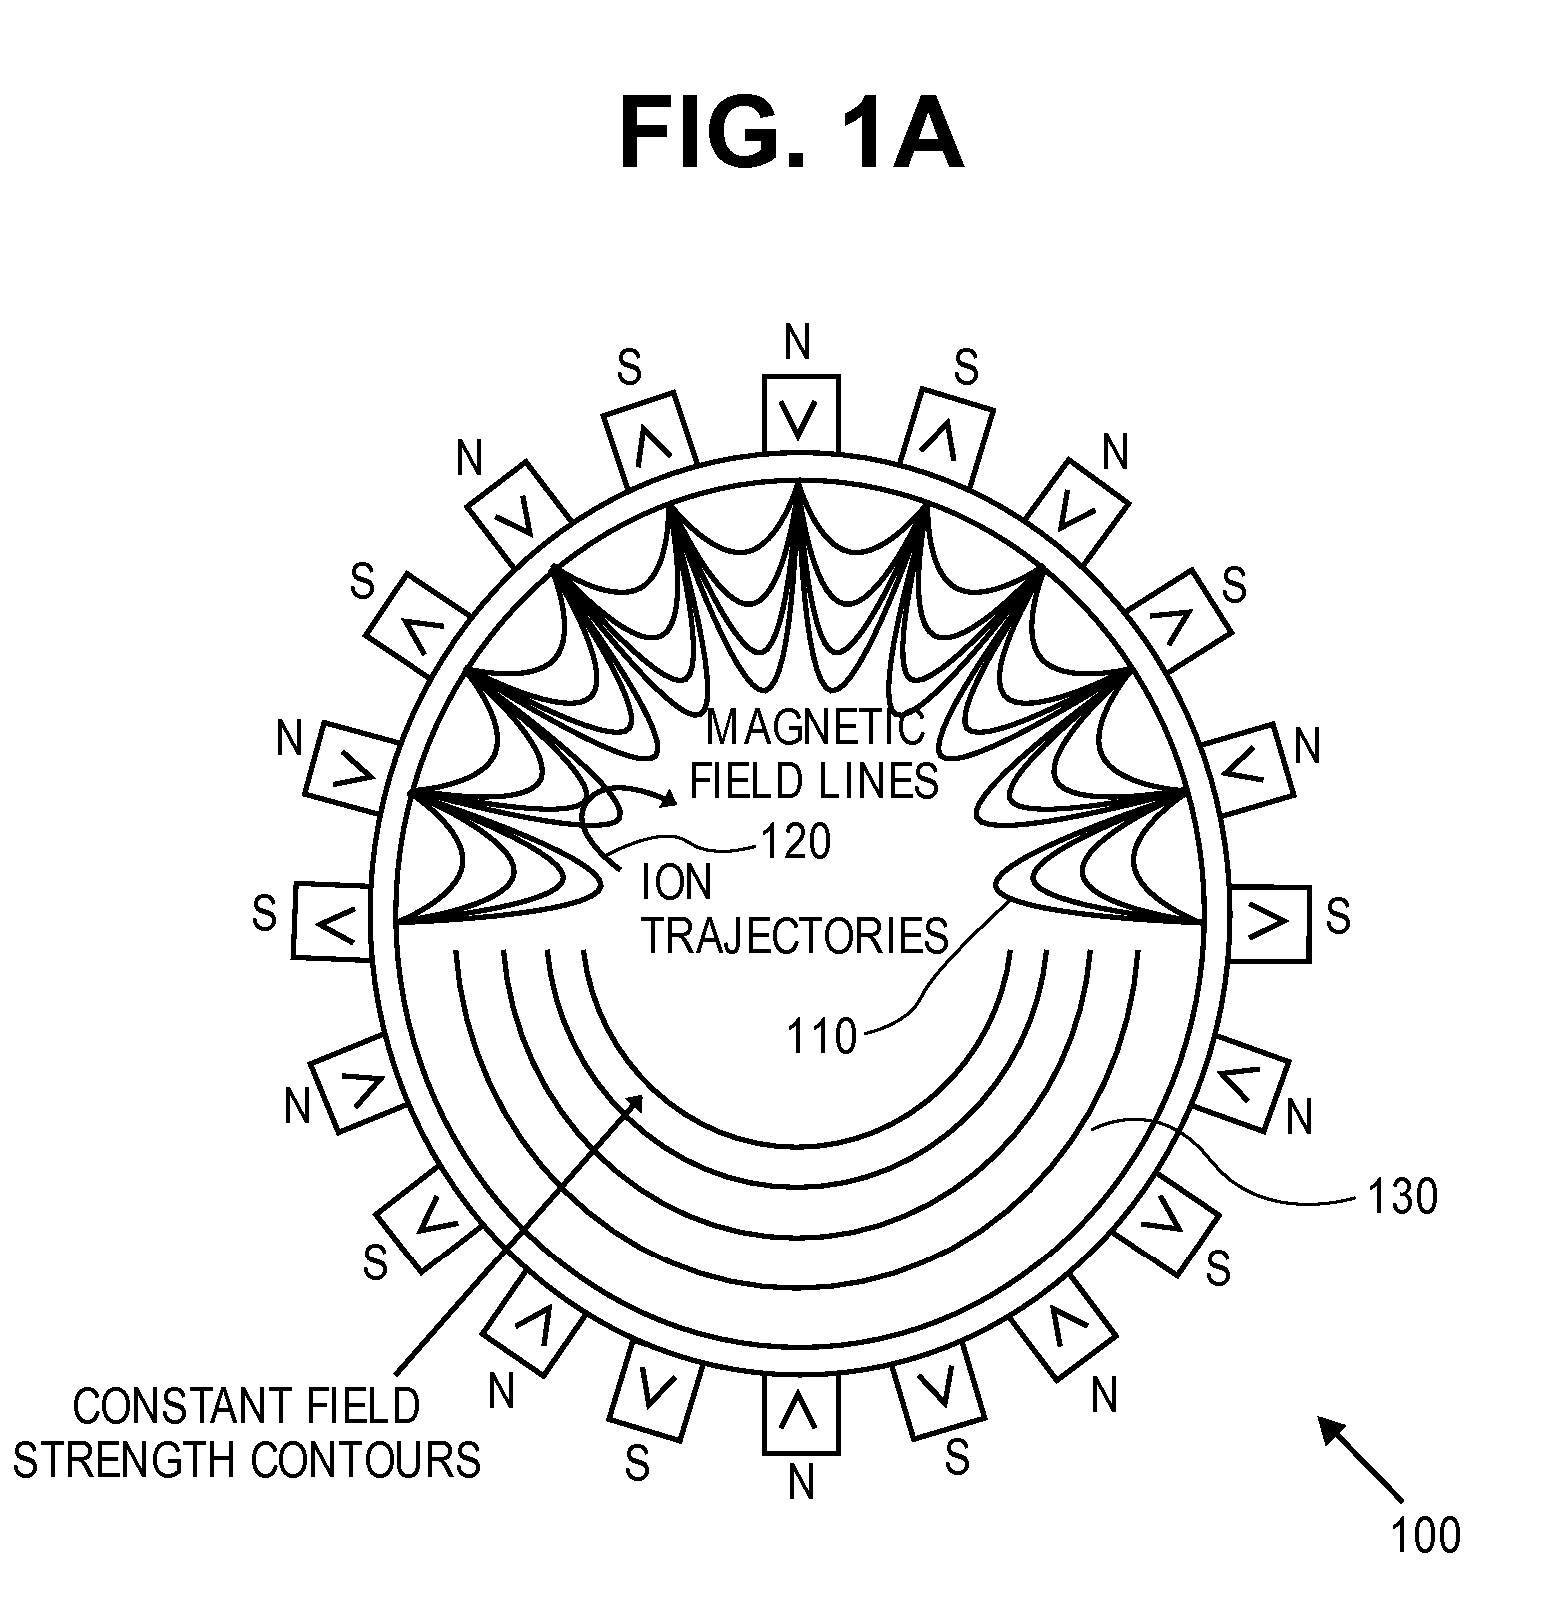 High brightness-multiple beamlets source for patterned X-ray production